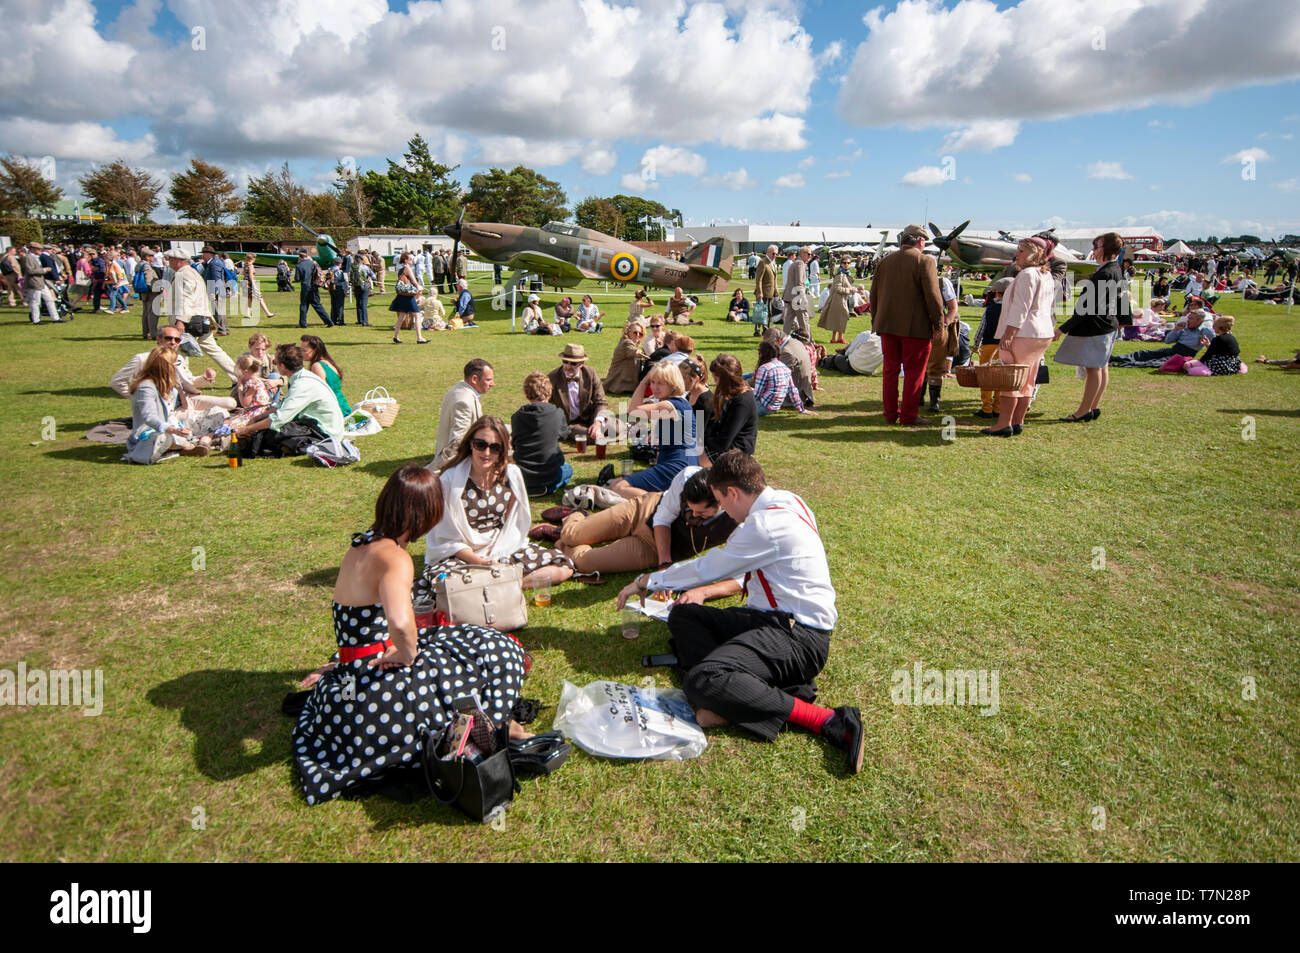 People in period attire at the Goodwood Revival, UK. Picnics on the lawn with Second World War planes. Period dress, costumes. British Stock Photo